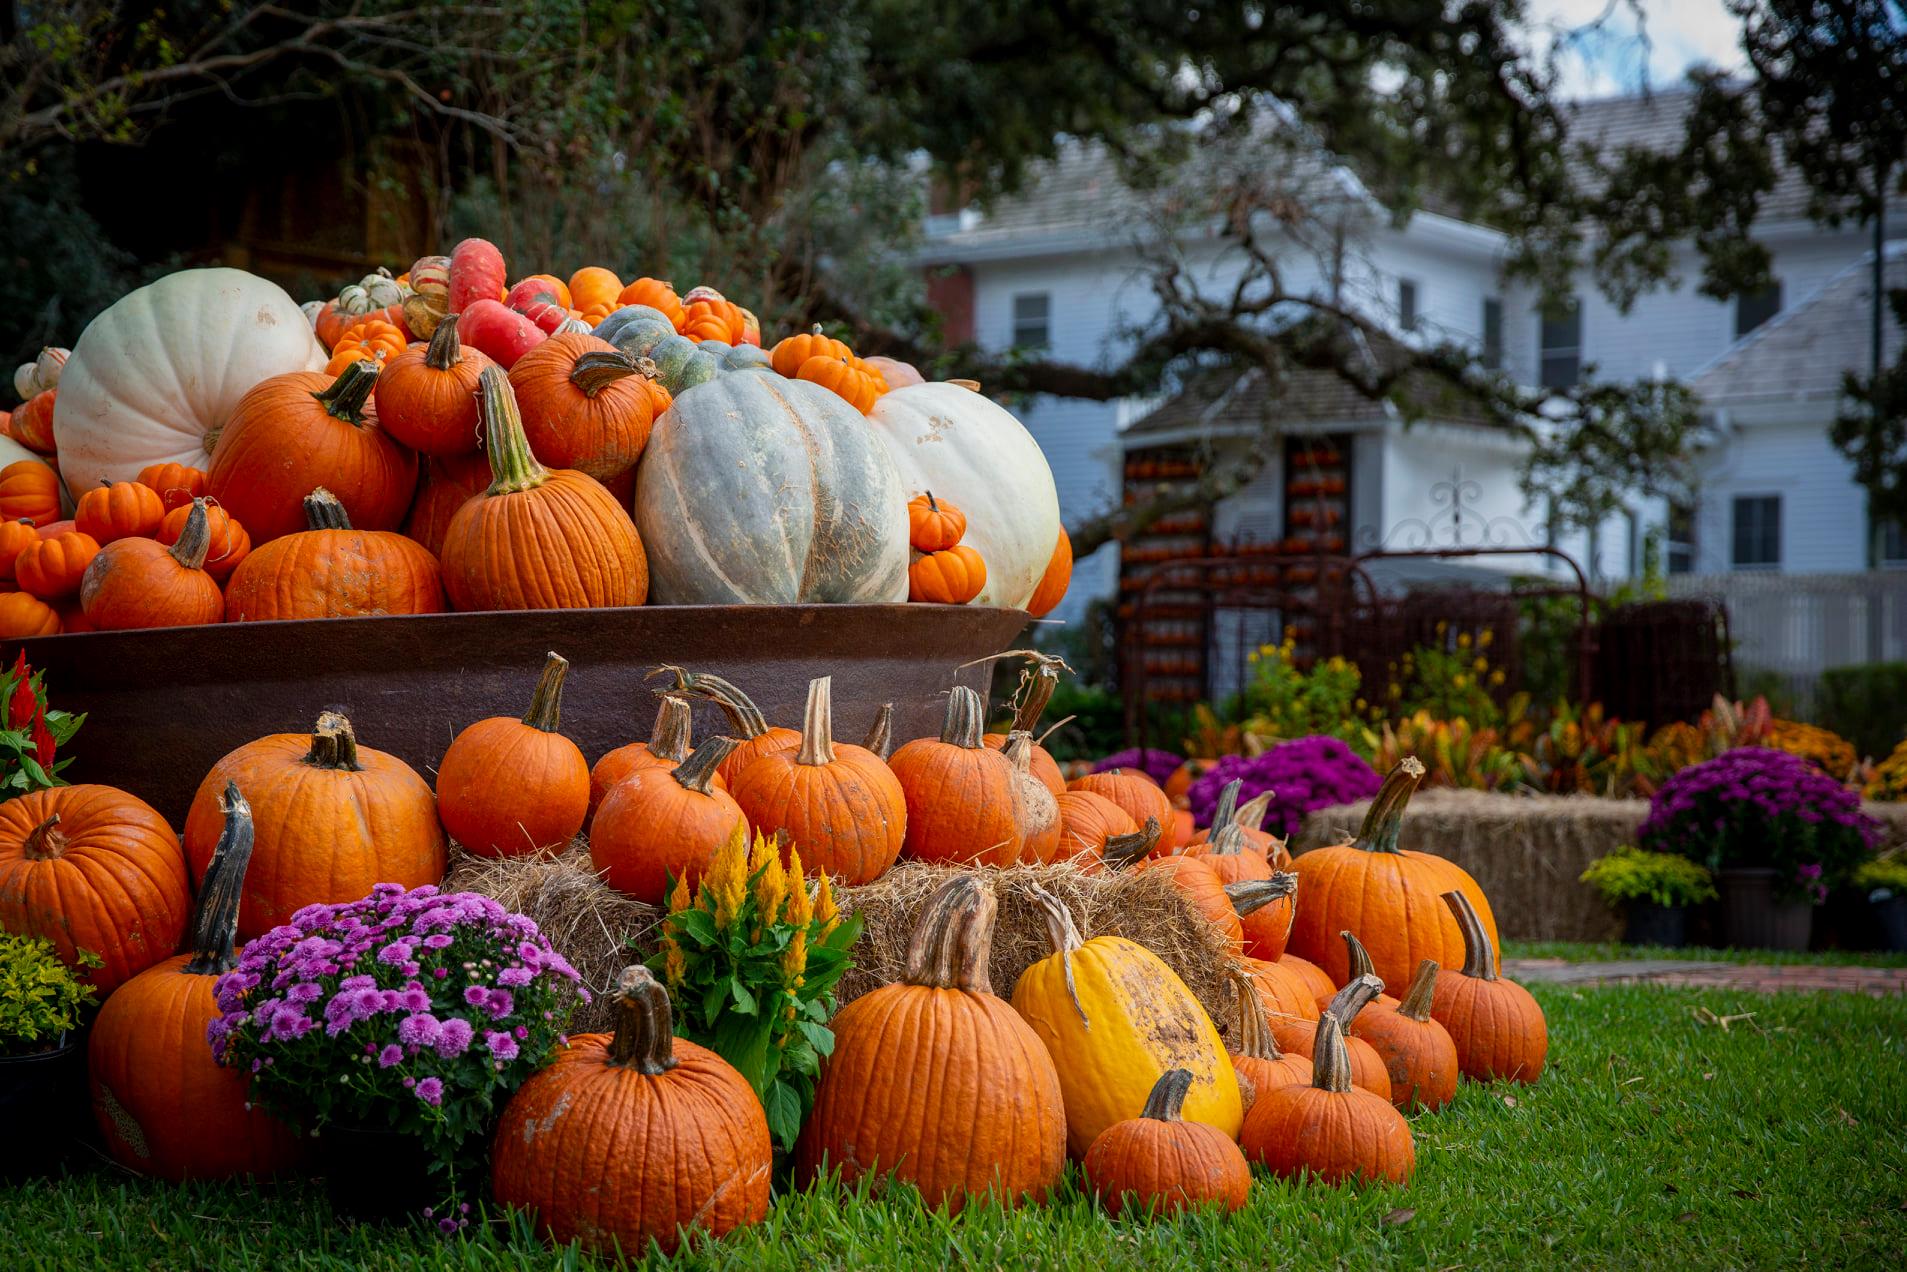 Picturesque Pumpkin Display Returning to George Ranch Historical Park in Richmond